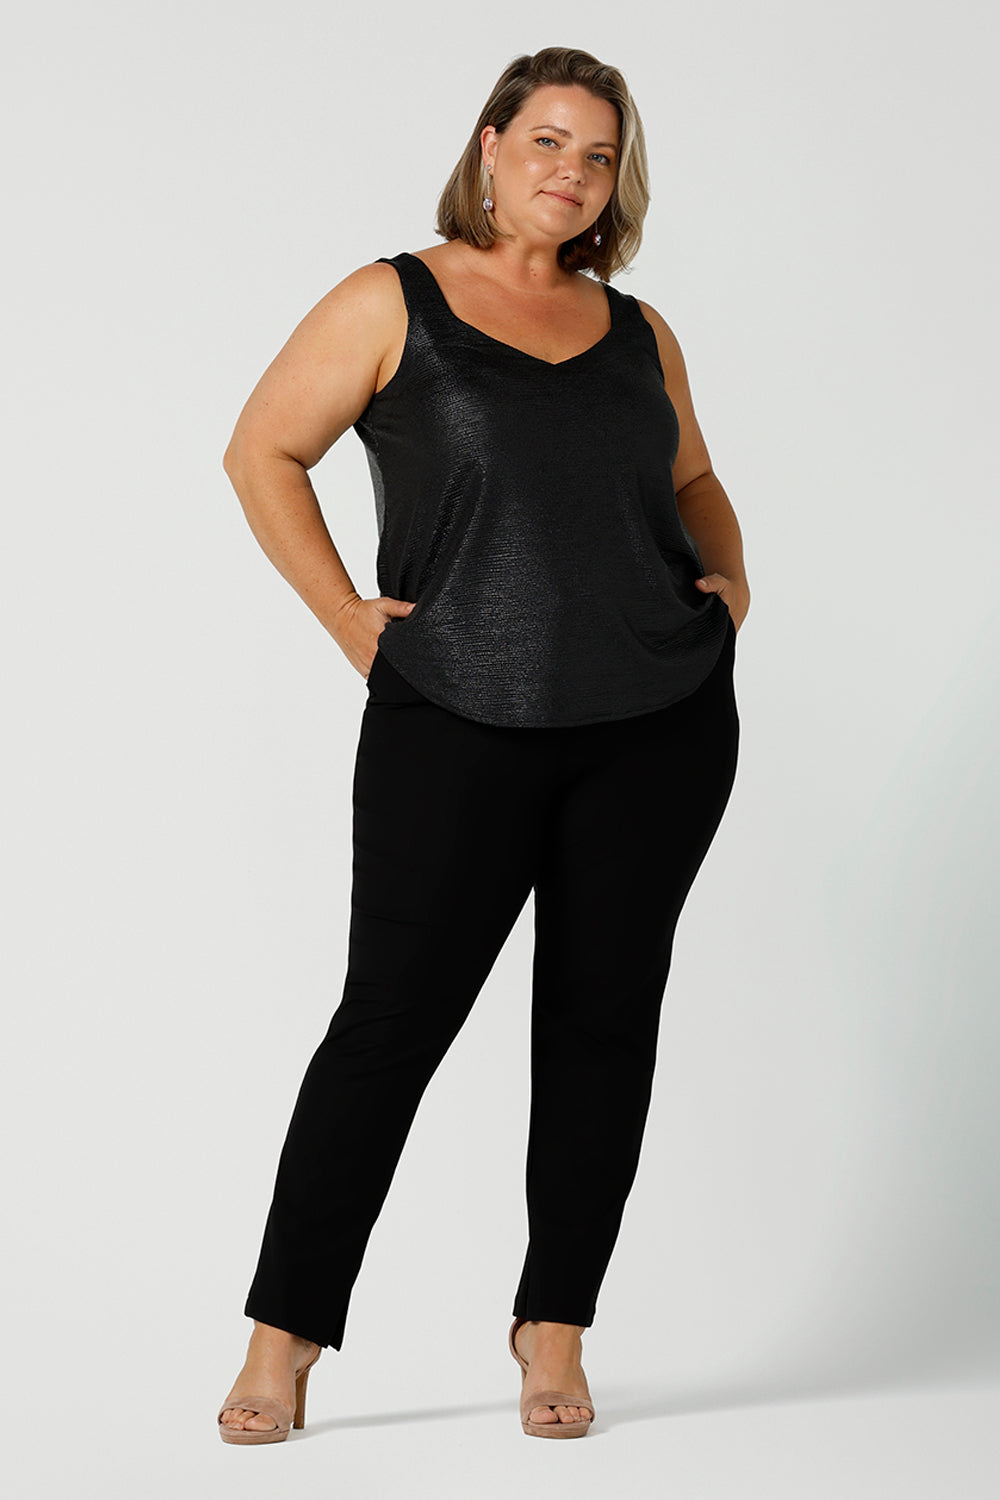  A size 18, fuller figure woman wears a black Xanadu cami top with wide shoulder straps. Made in Australia by Australian and New Zealand women's clothing company. She wears this shimmer jersey top with black pants for a classic evening look. 